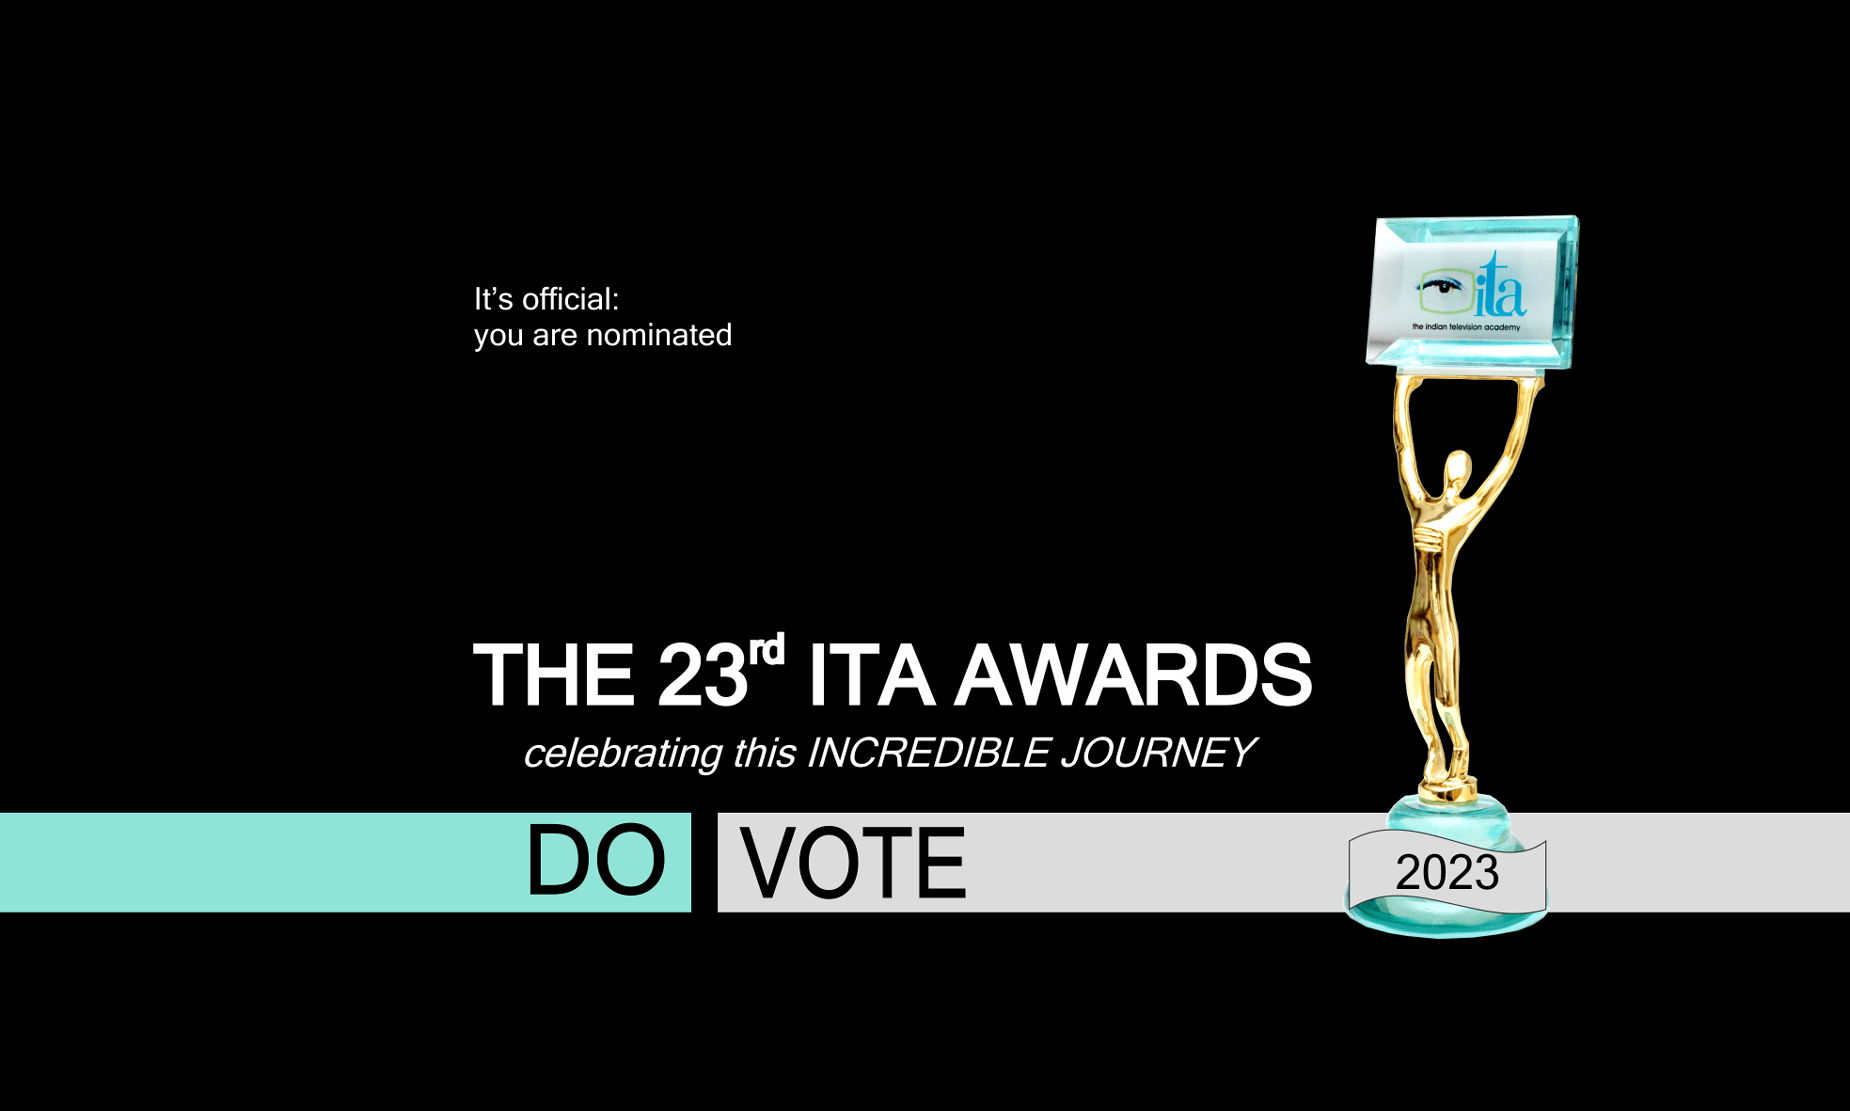 The 23rd ITA Awards - Celebrating 23 years of this INCREDIBLE JOURNEY...